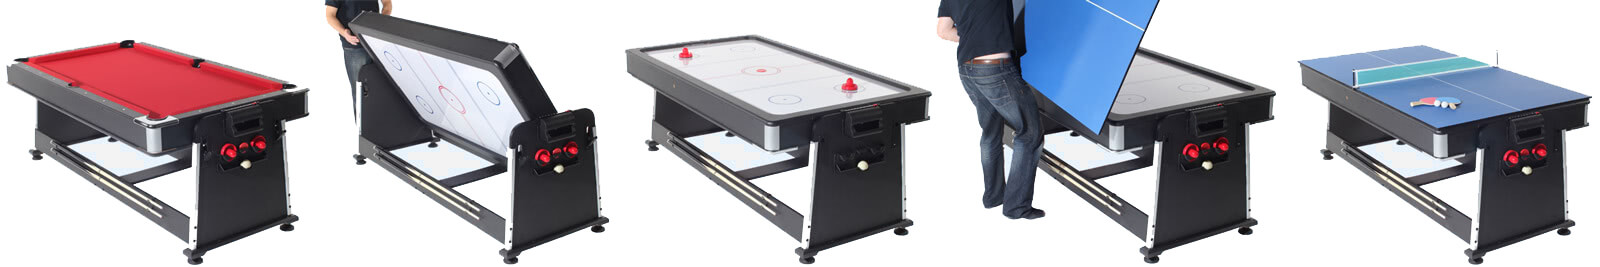 Multigames Table Buyer's Guide - All Round Fun